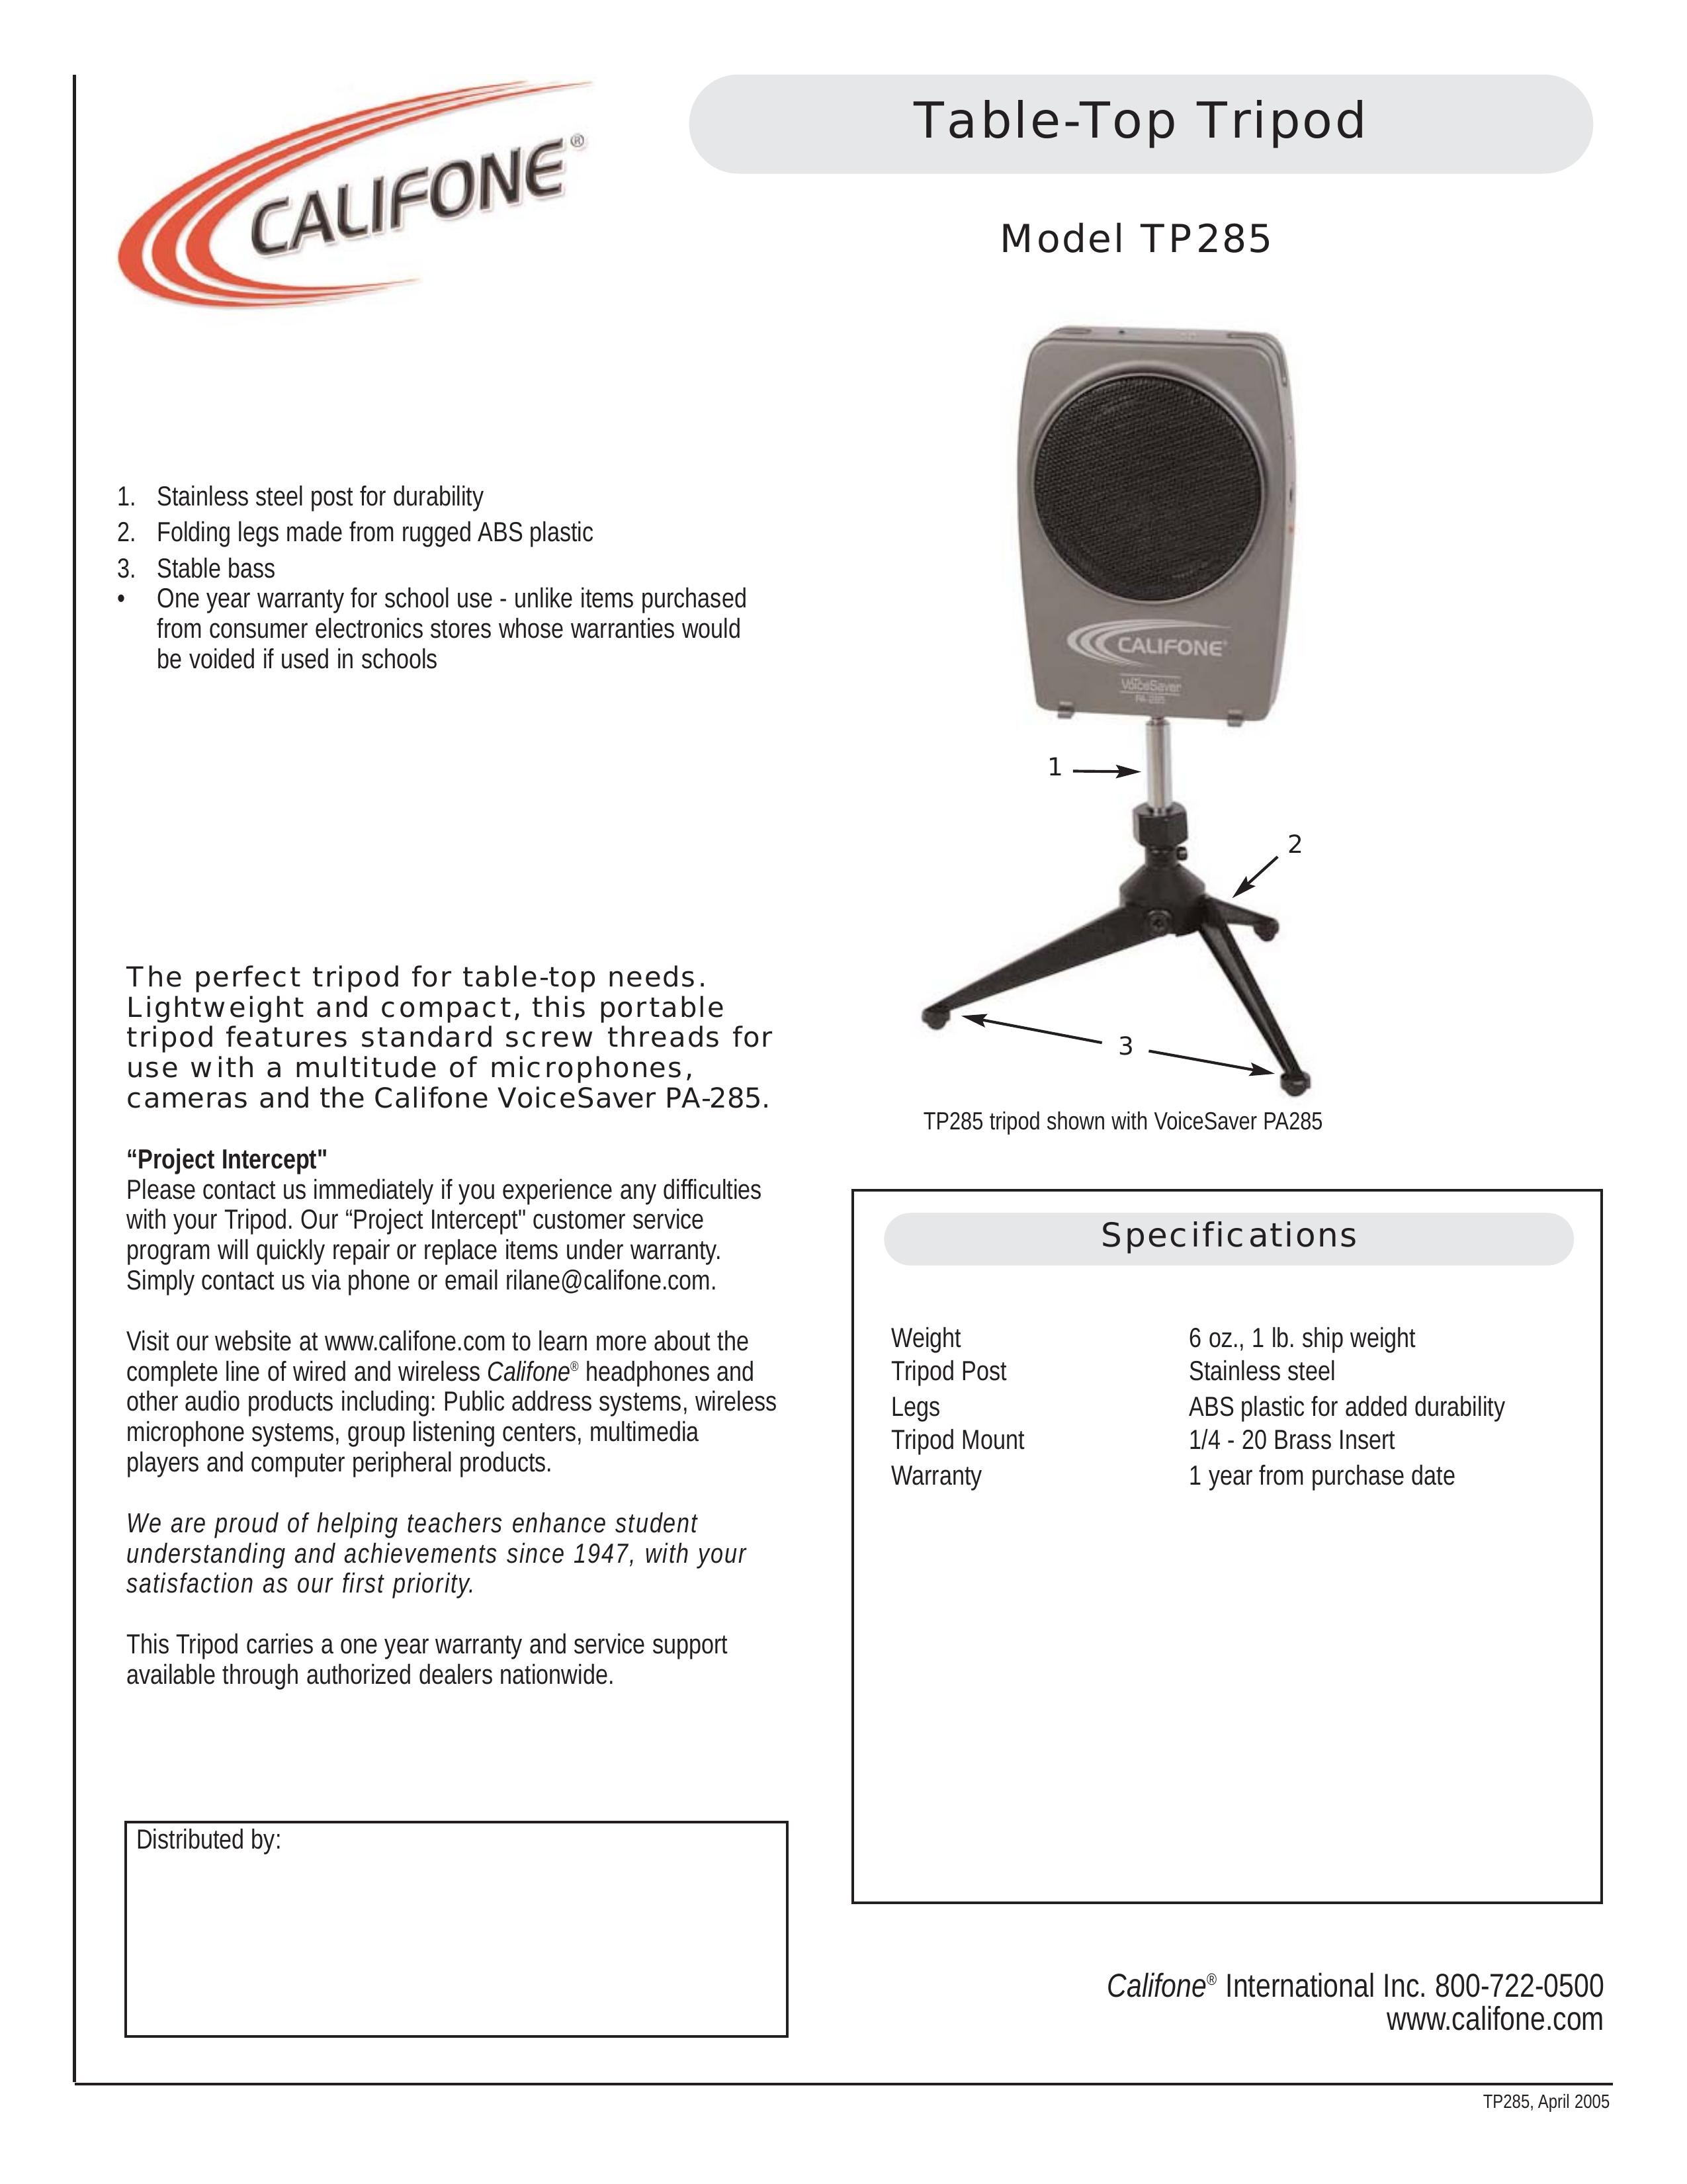 Califone TP285 Camcorder Accessories User Manual (Page 1)